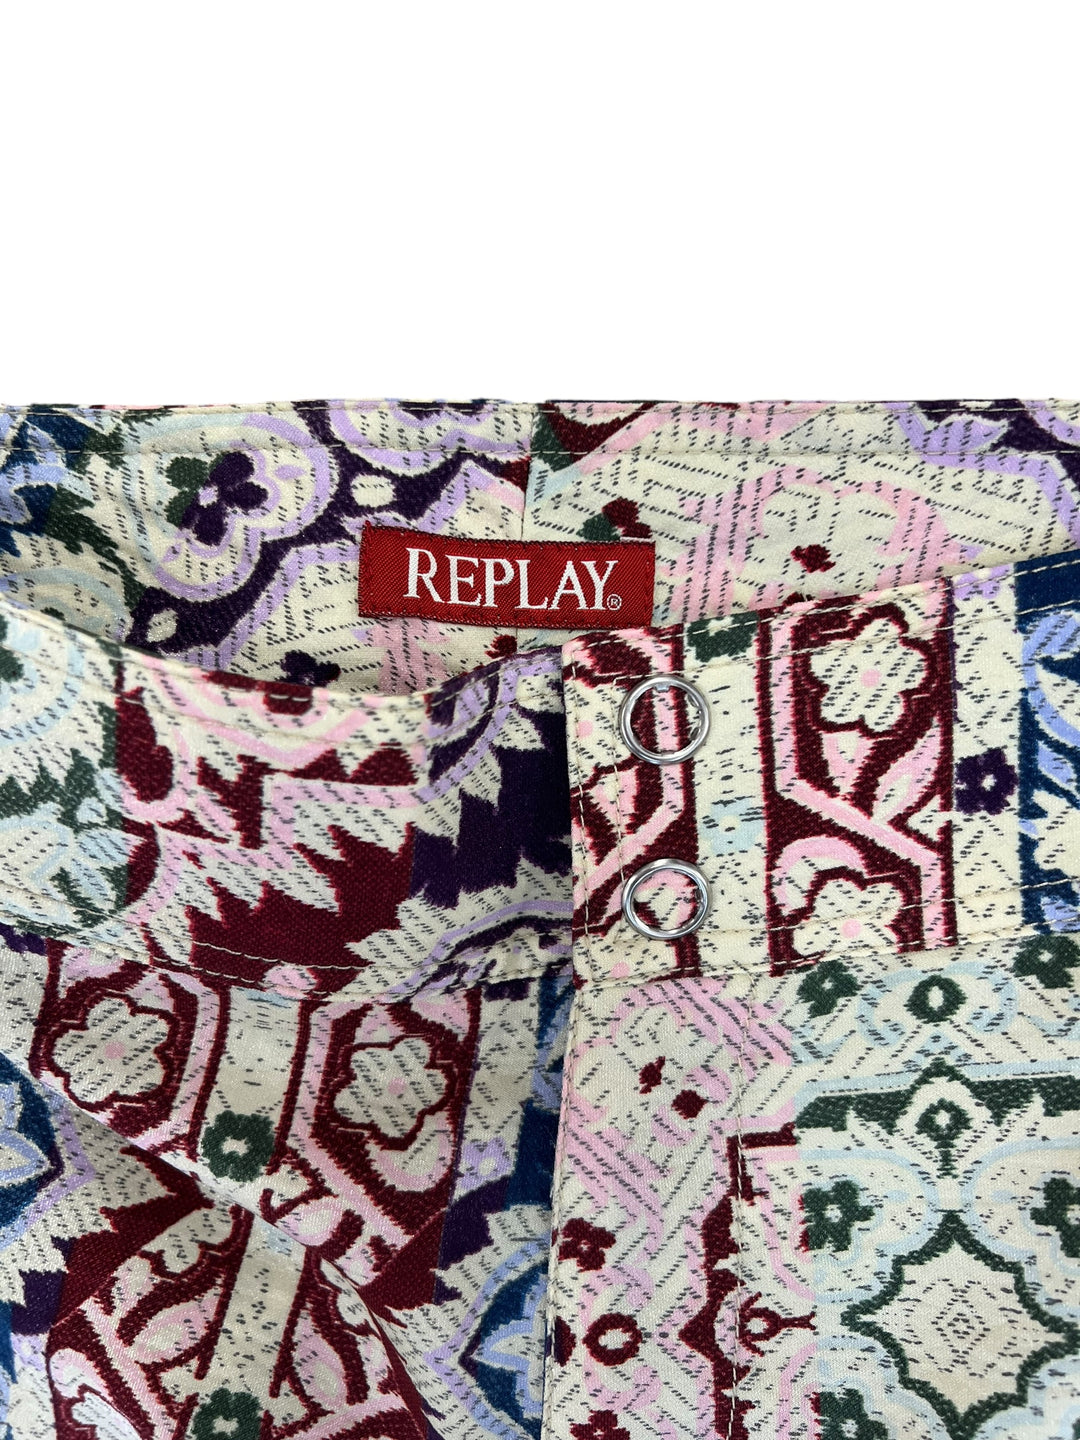 Replay vintage all over print pants women’s small(34)